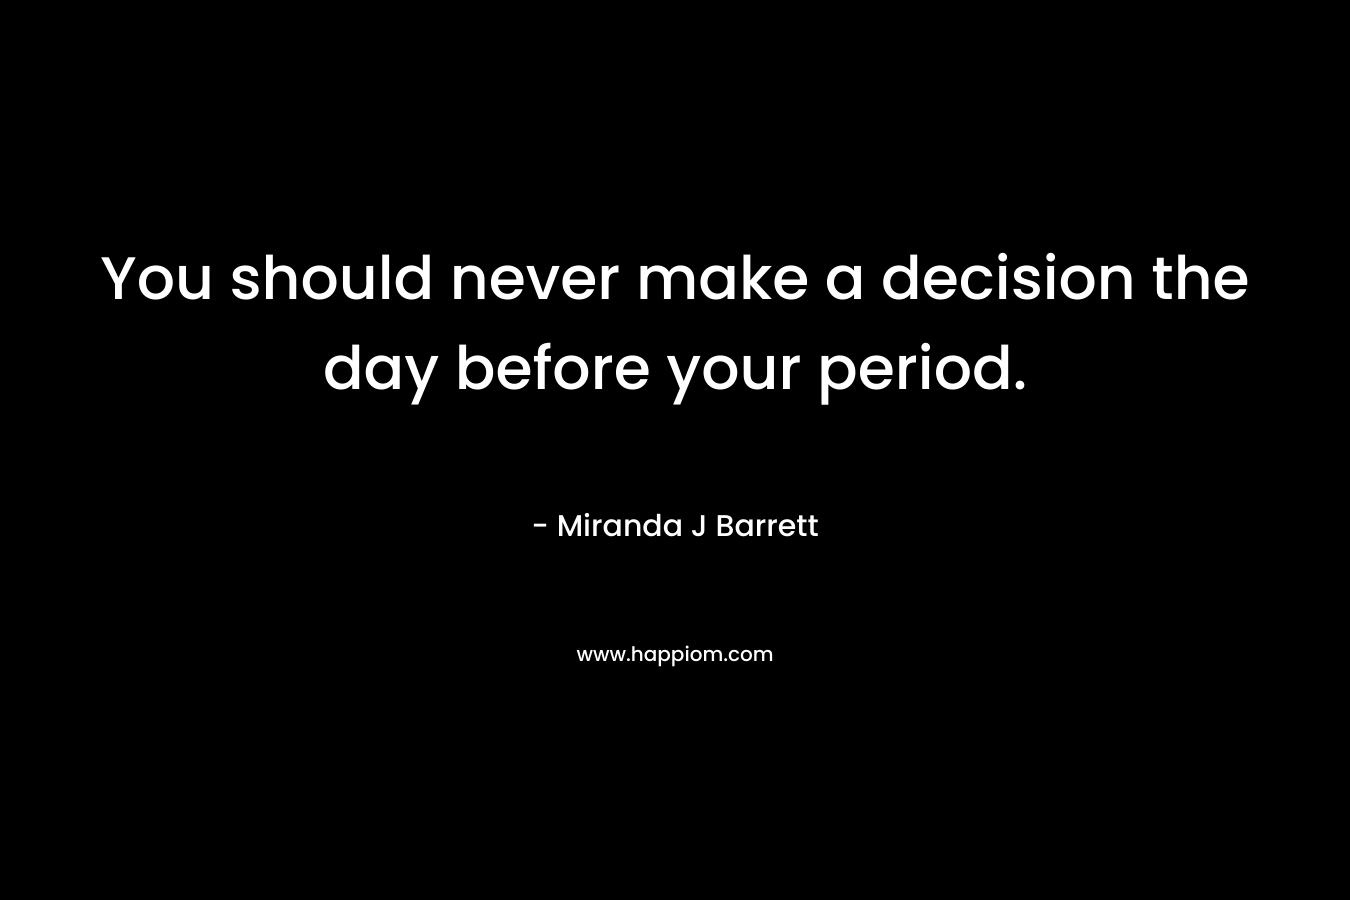 You should never make a decision the day before your period. – Miranda J Barrett